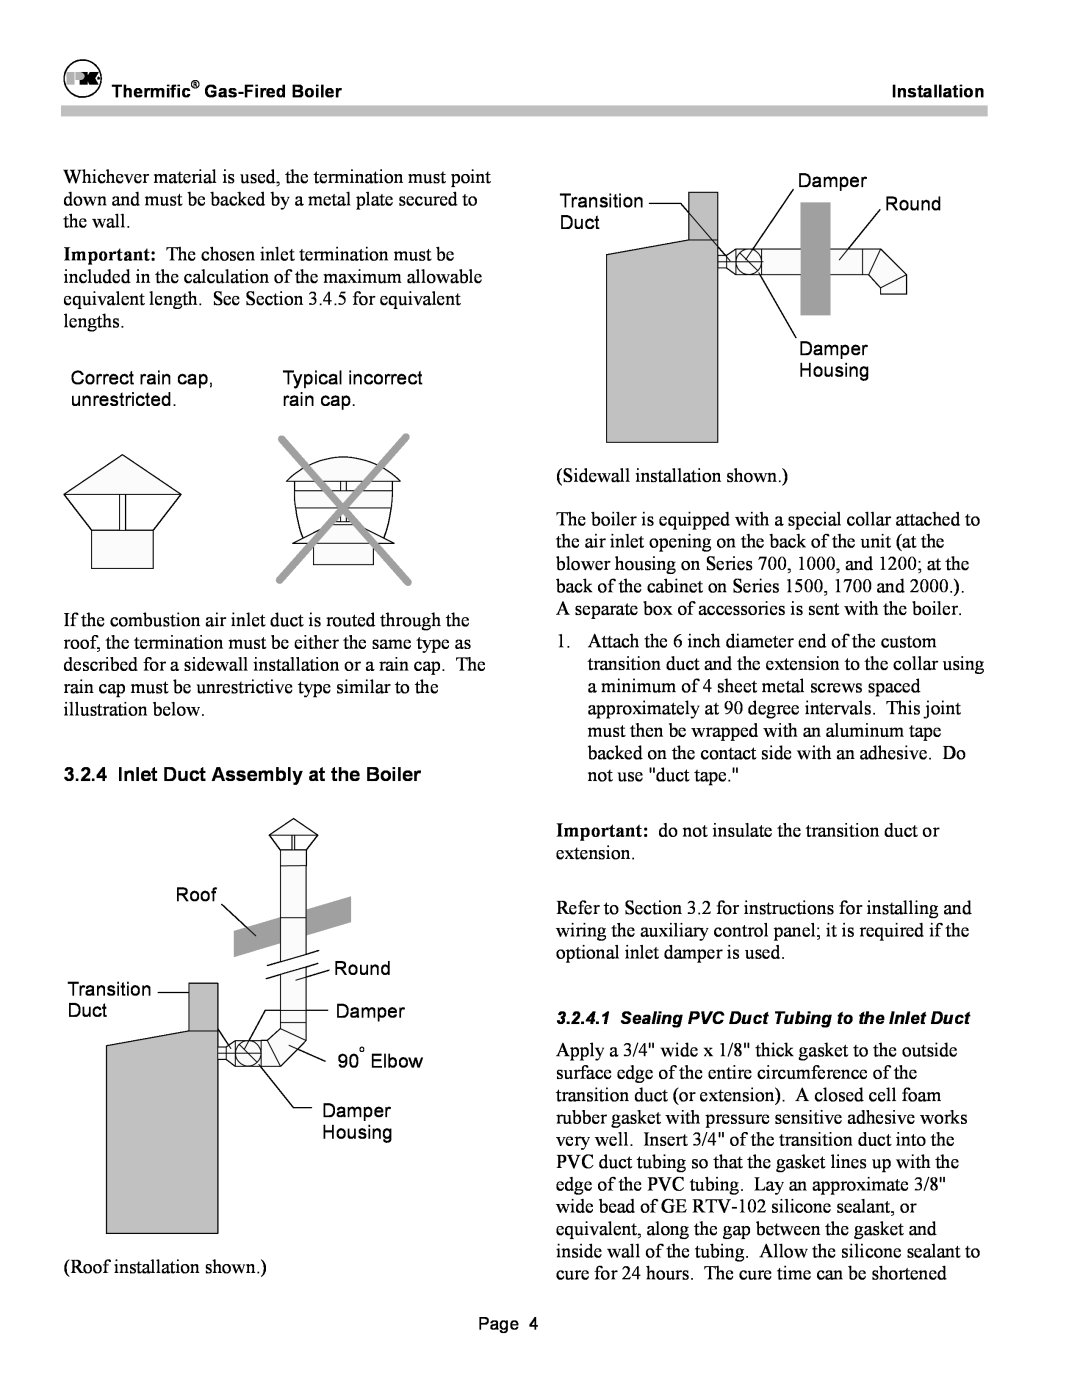 Patterson-Kelley DVSCM-02 owner manual Inlet Duct Assembly at the Boiler 